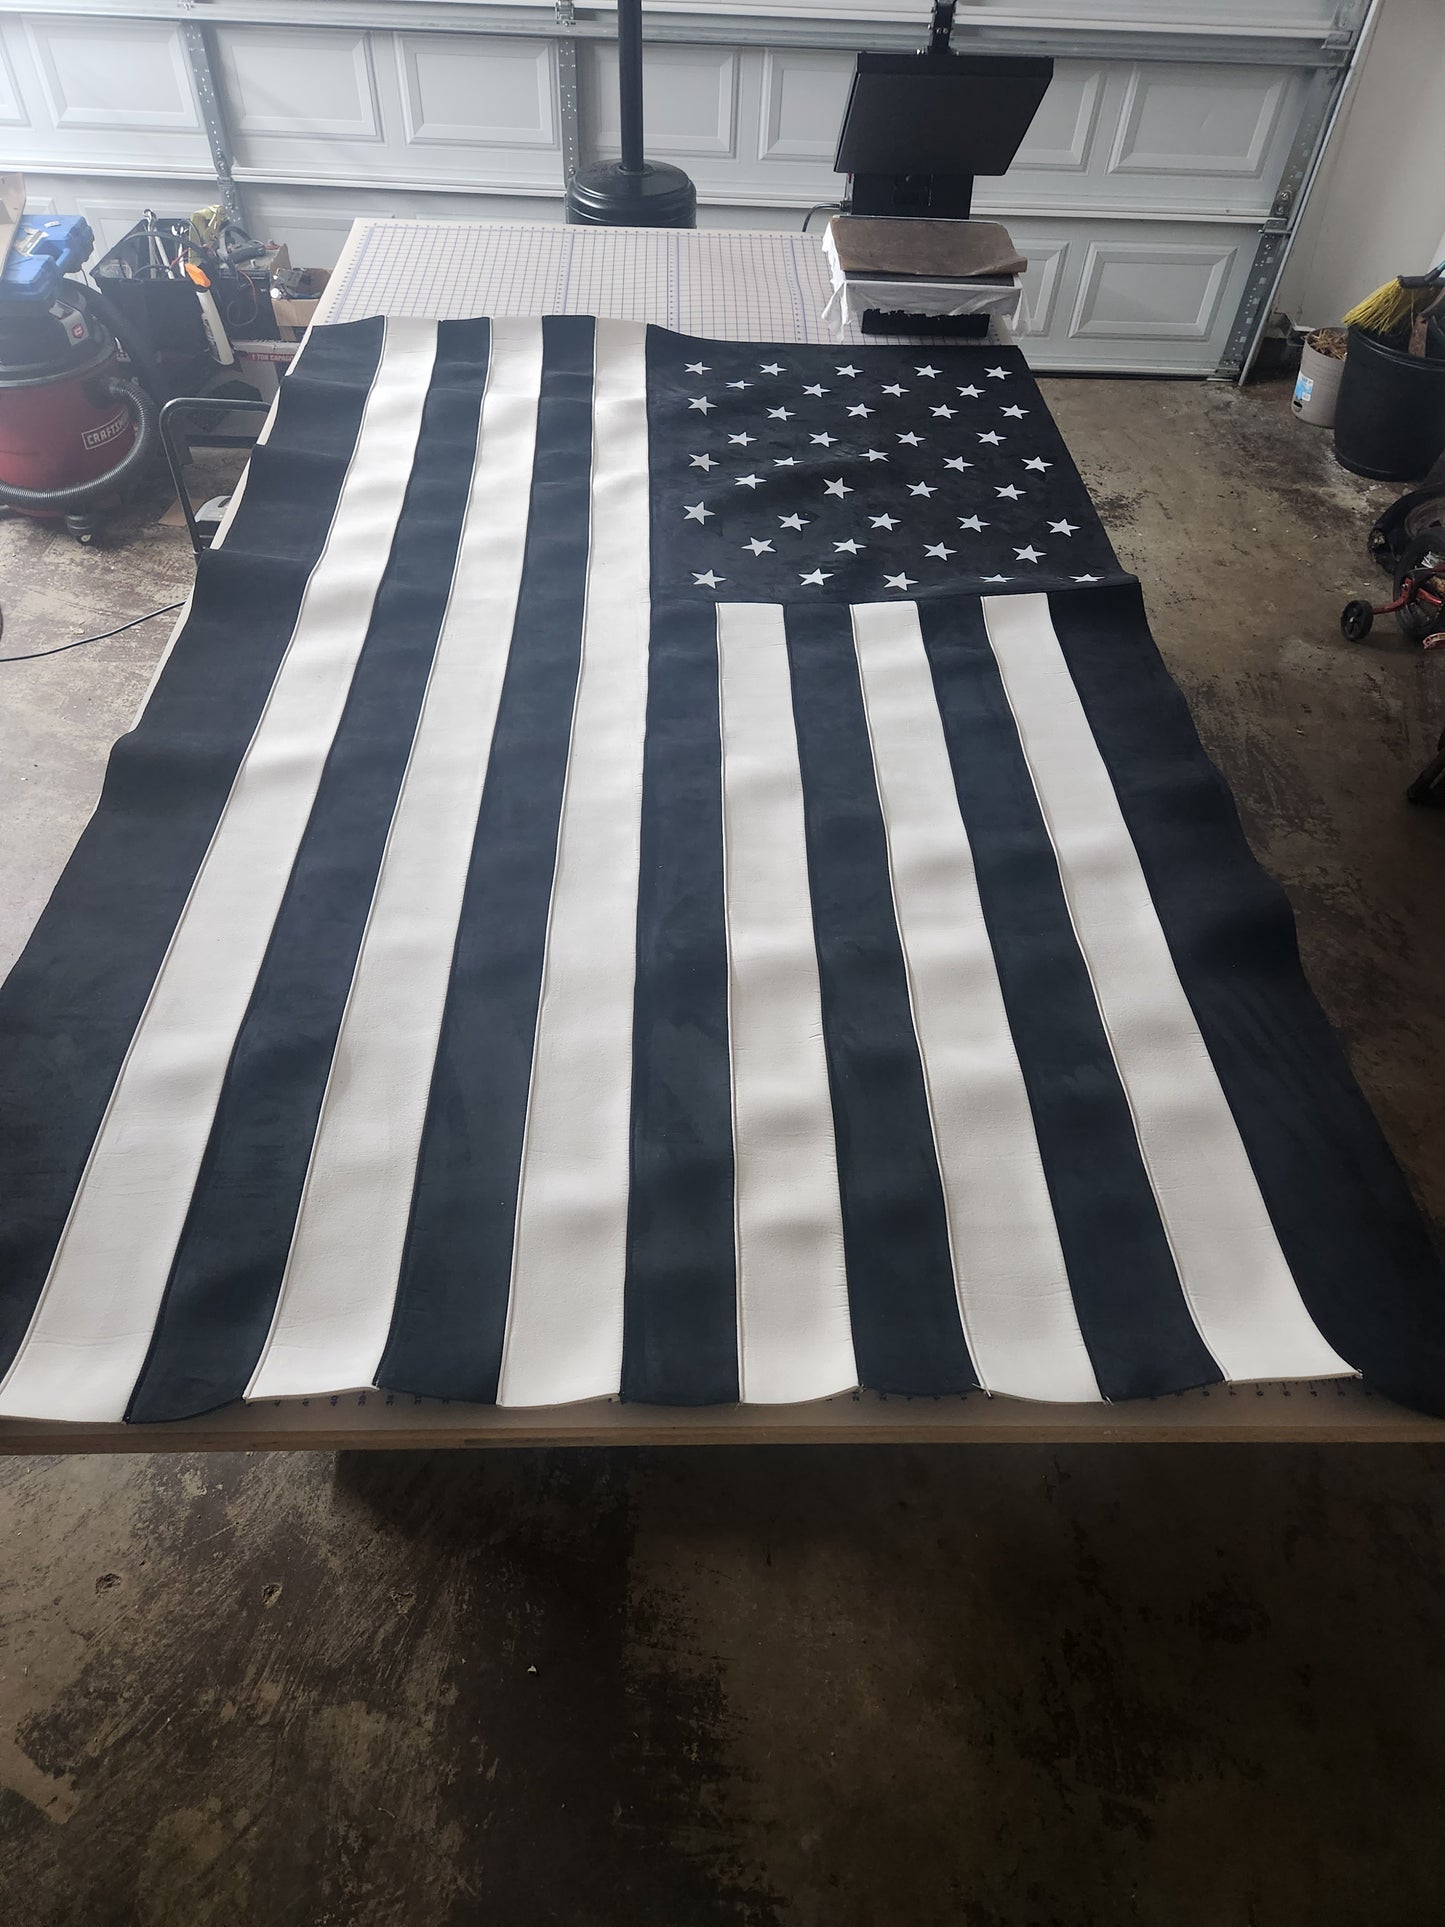 Black and White Suede American Flag Headliner Kit for Crew / Quad Cab Truck